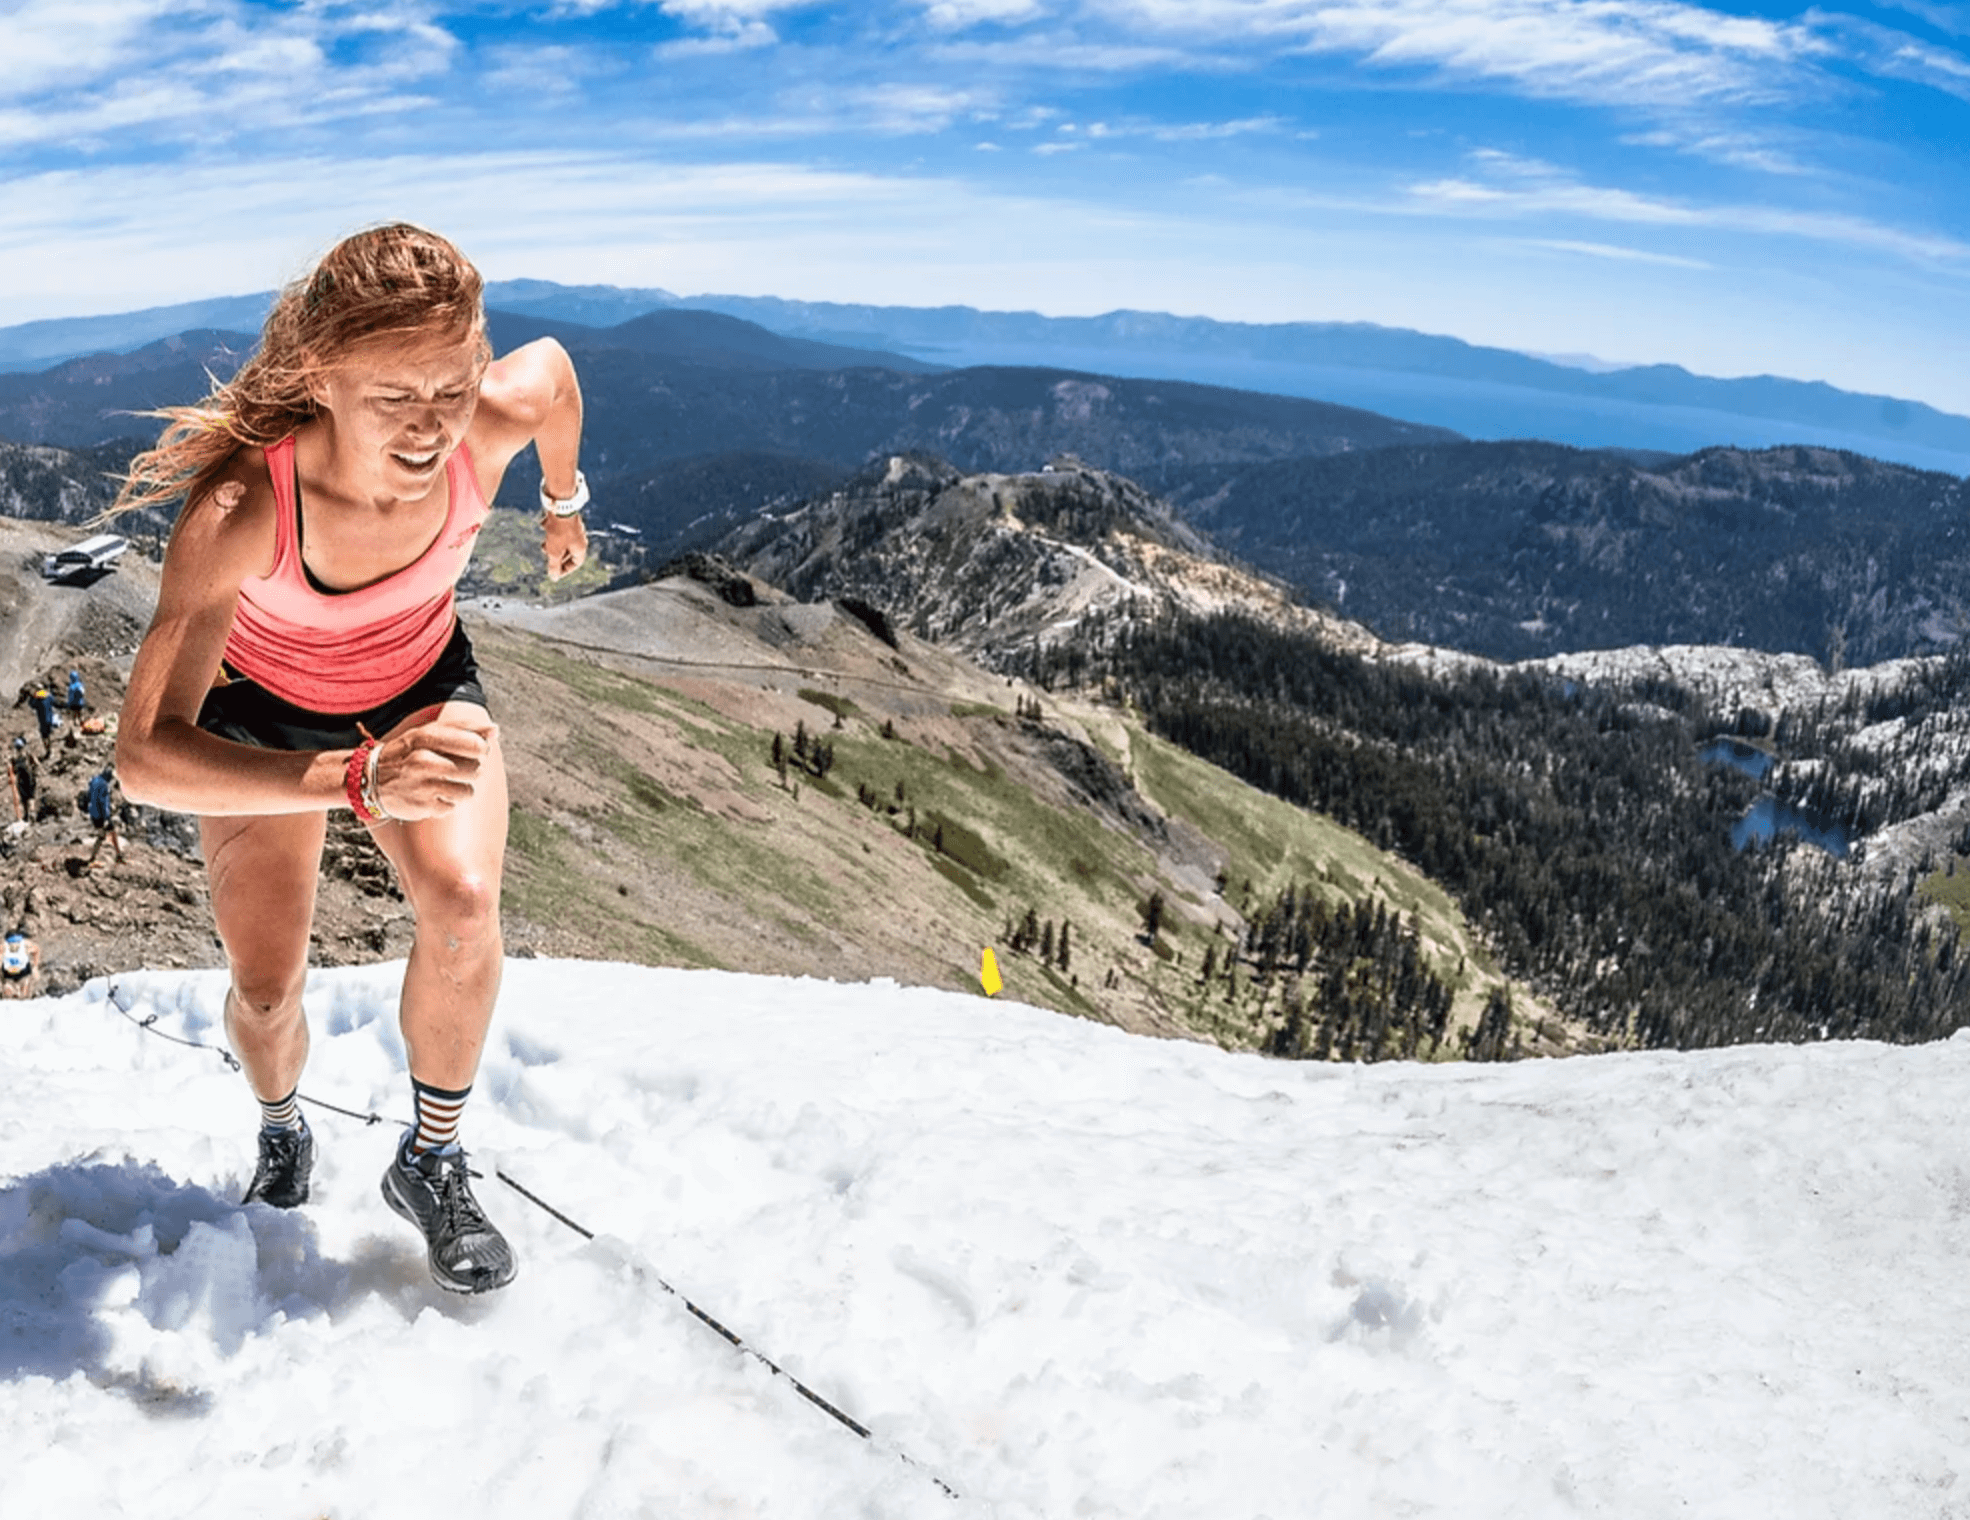 A competitor running during the Broken Arrow Skyrace on the Tahoe Via Ferrata.